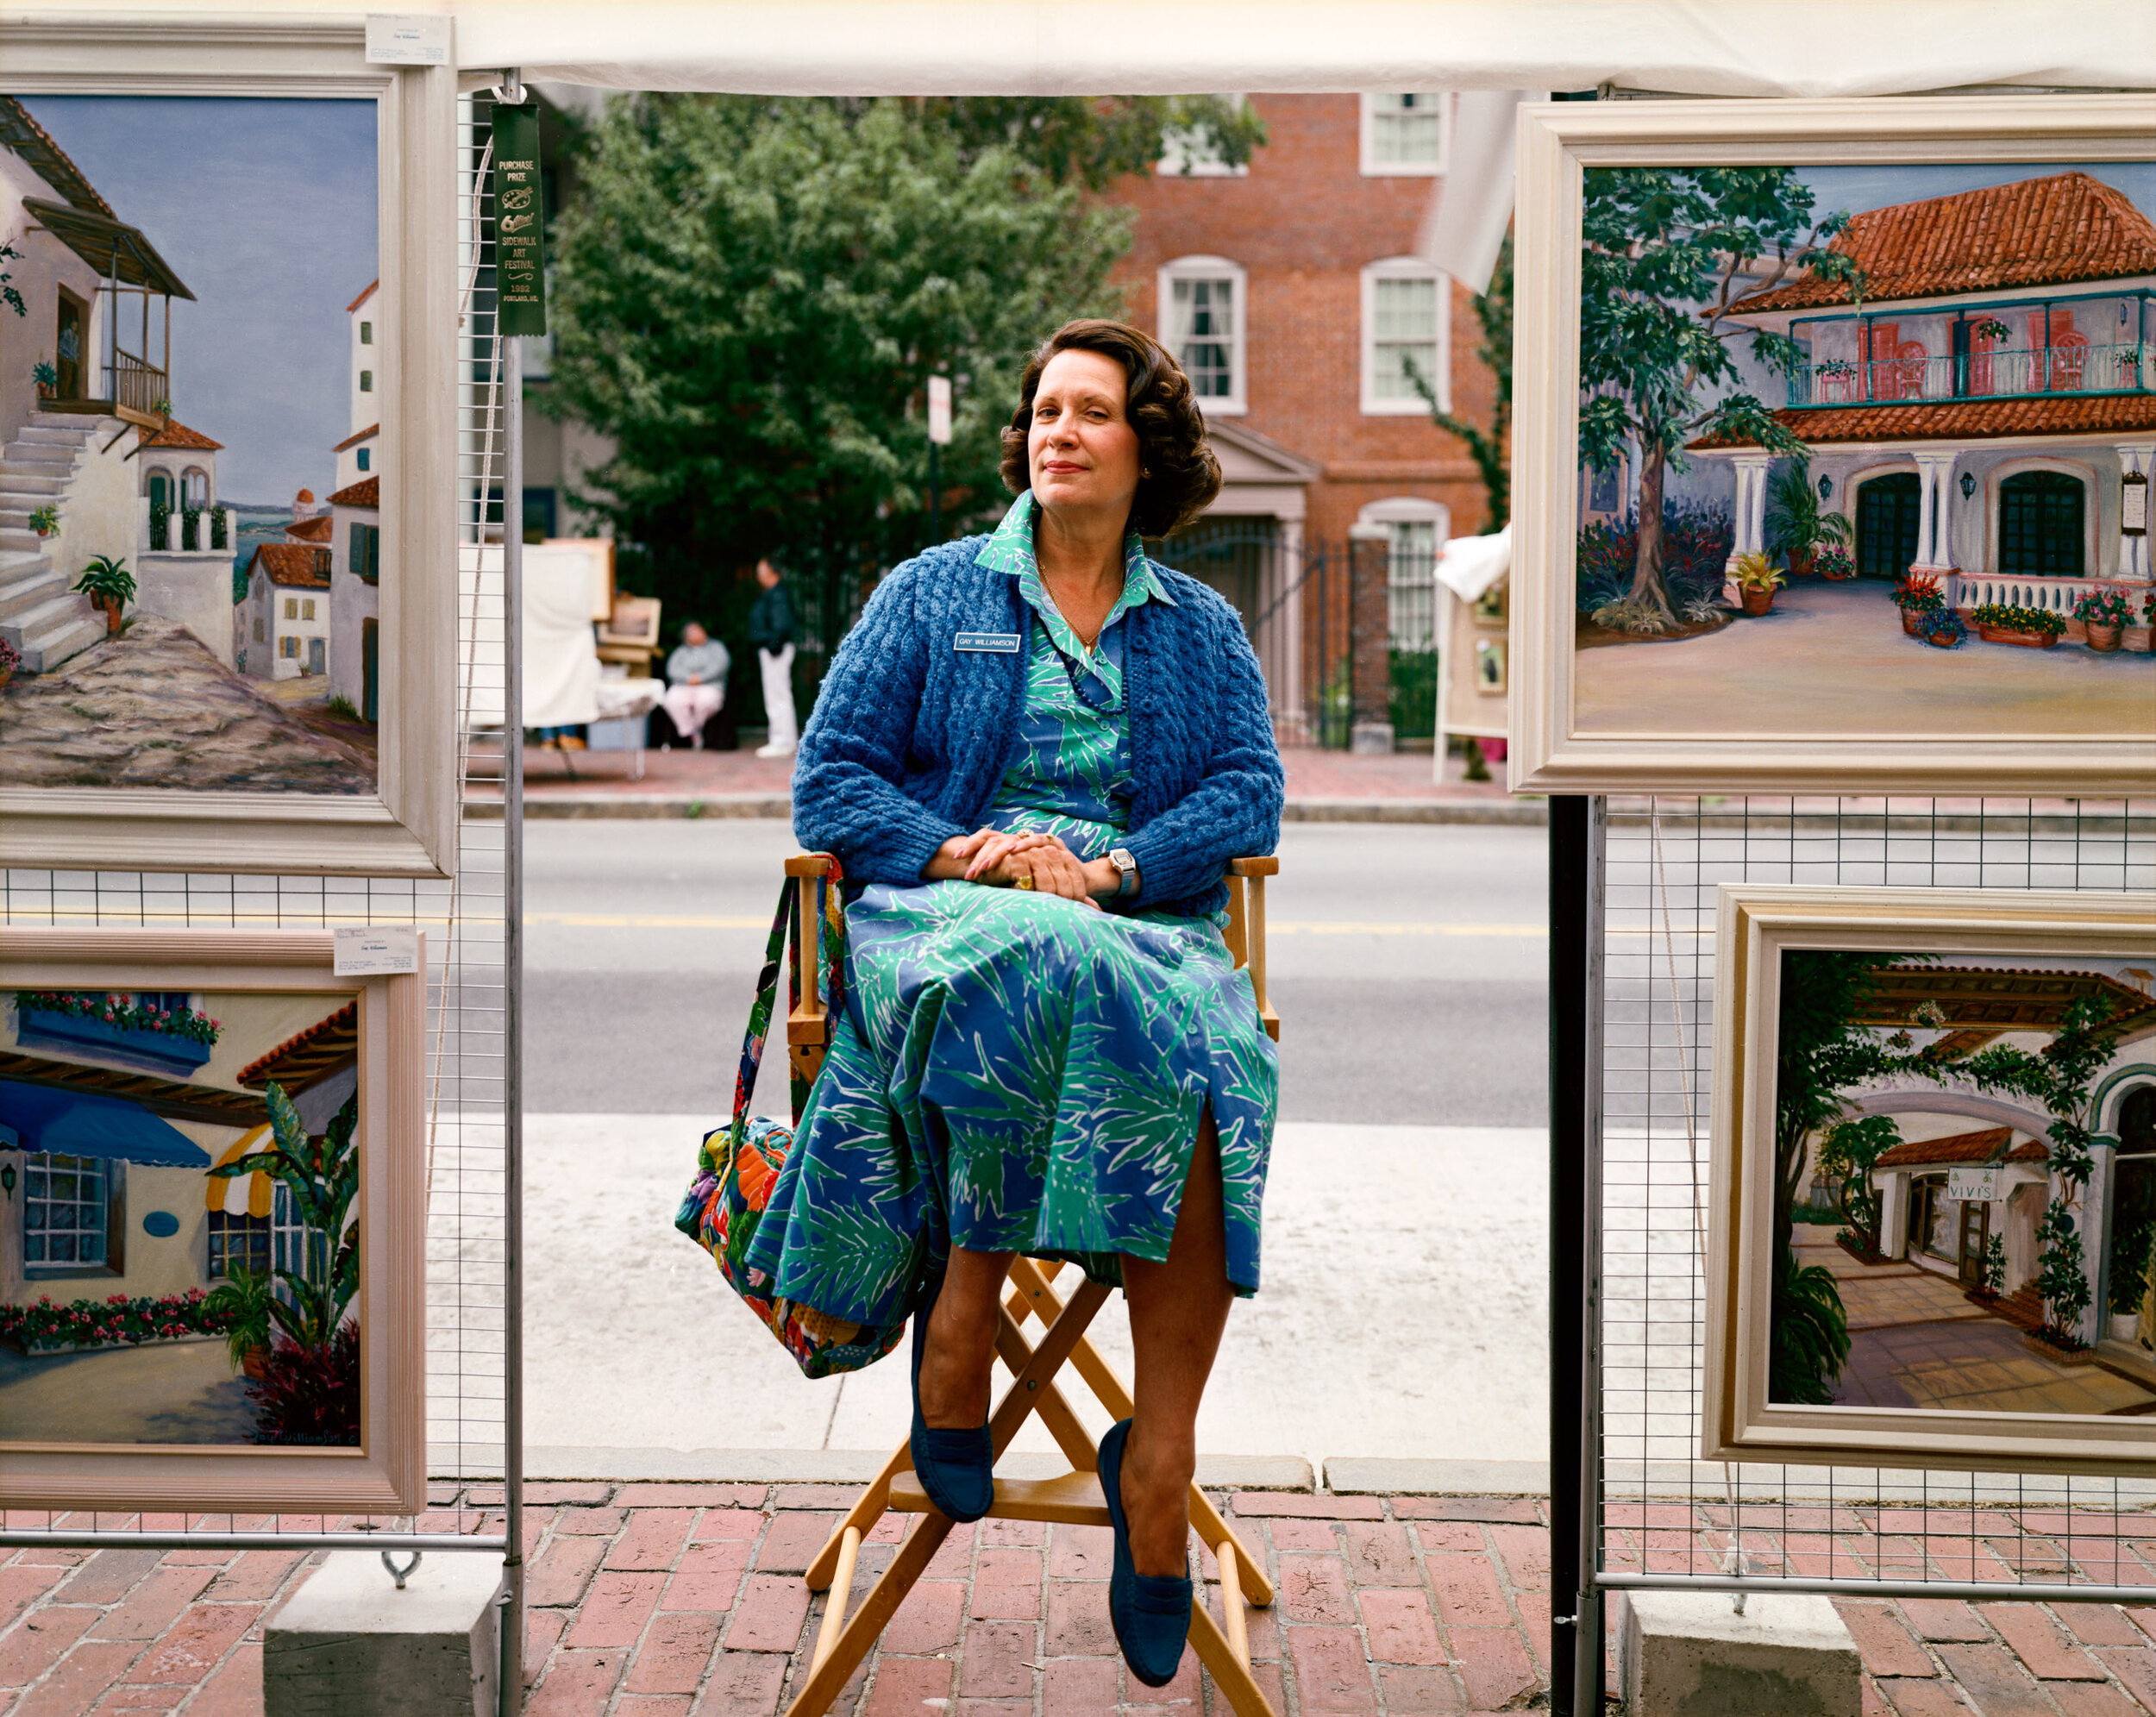 A Woman with Her Artwork, Portland, Maine, August 1992